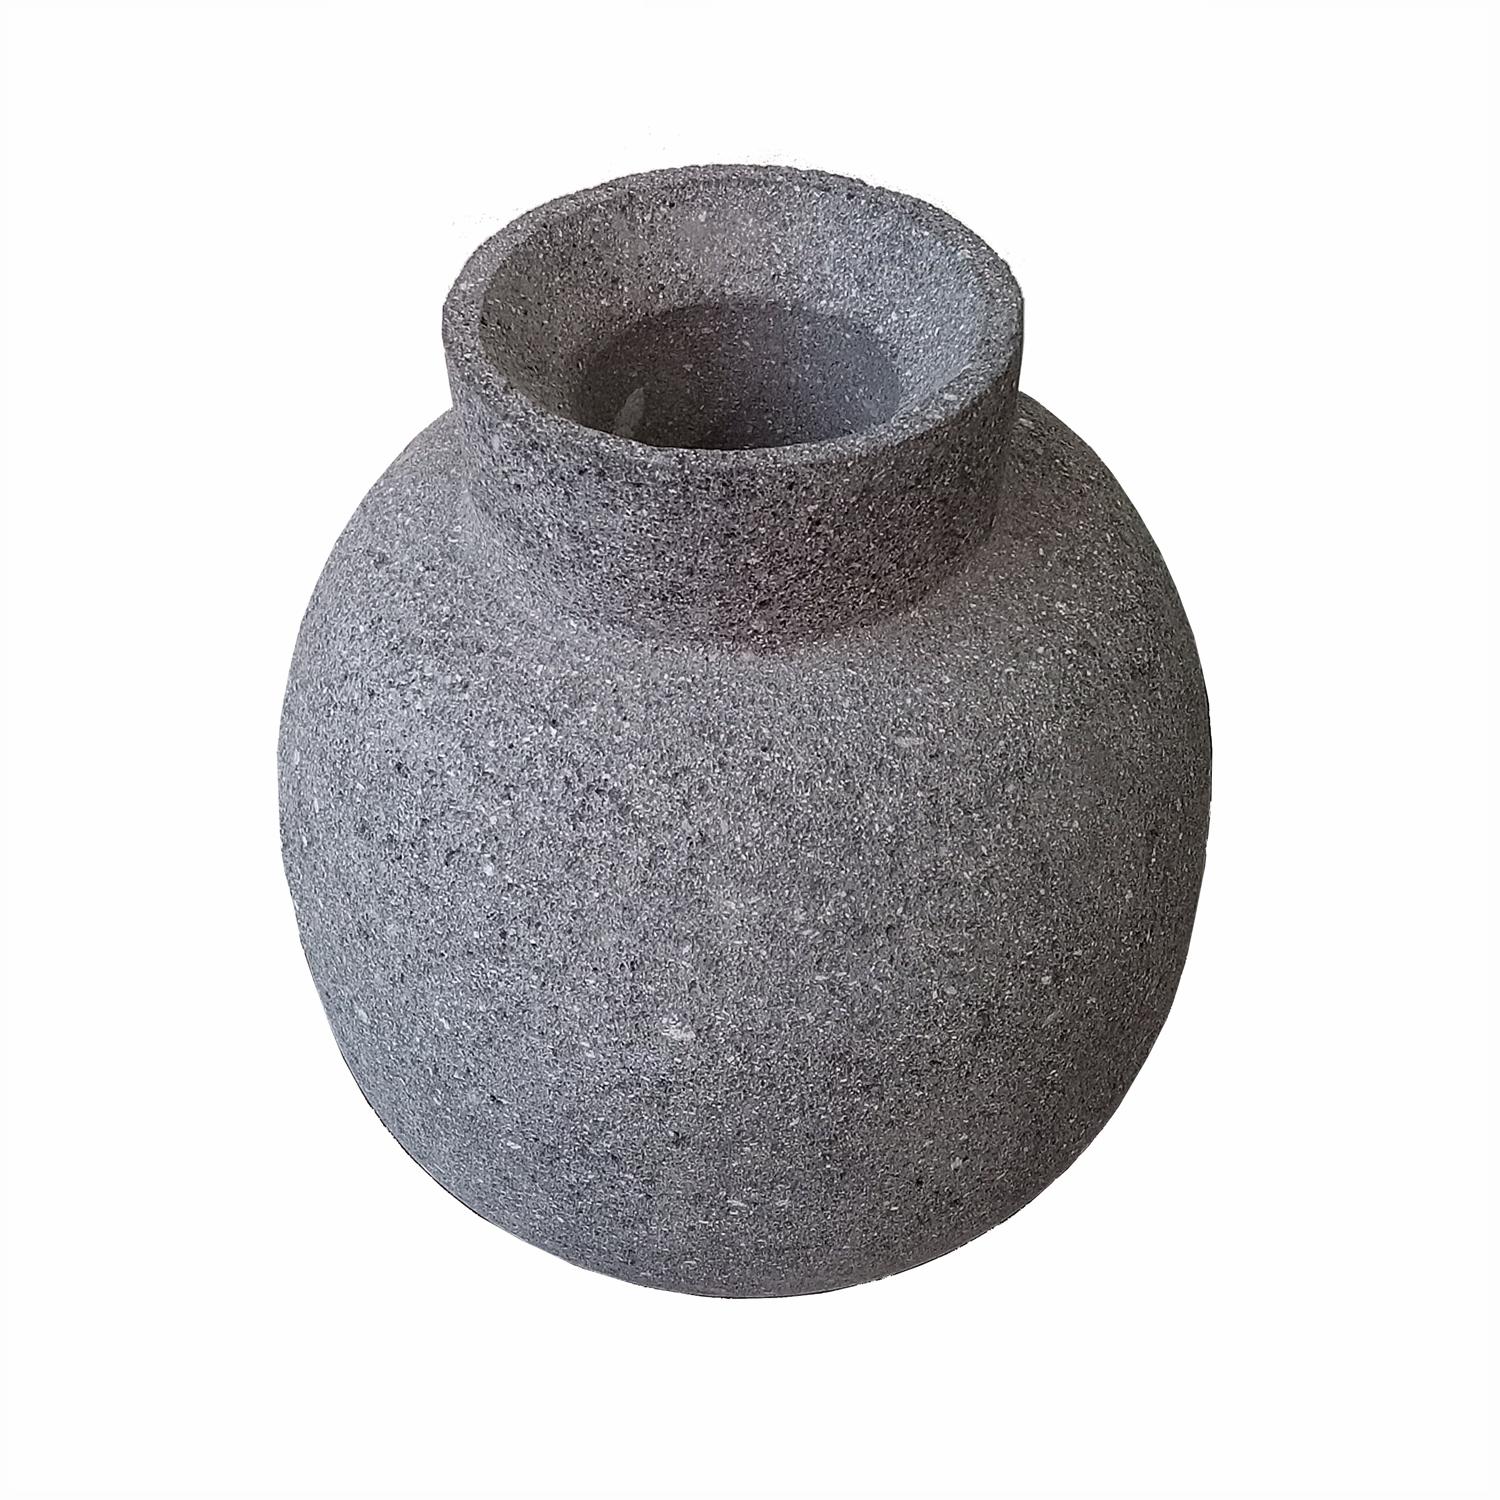 Organic Modern Hand-Carved Black Lava Rock Vase / Jar from Mexico For Sale